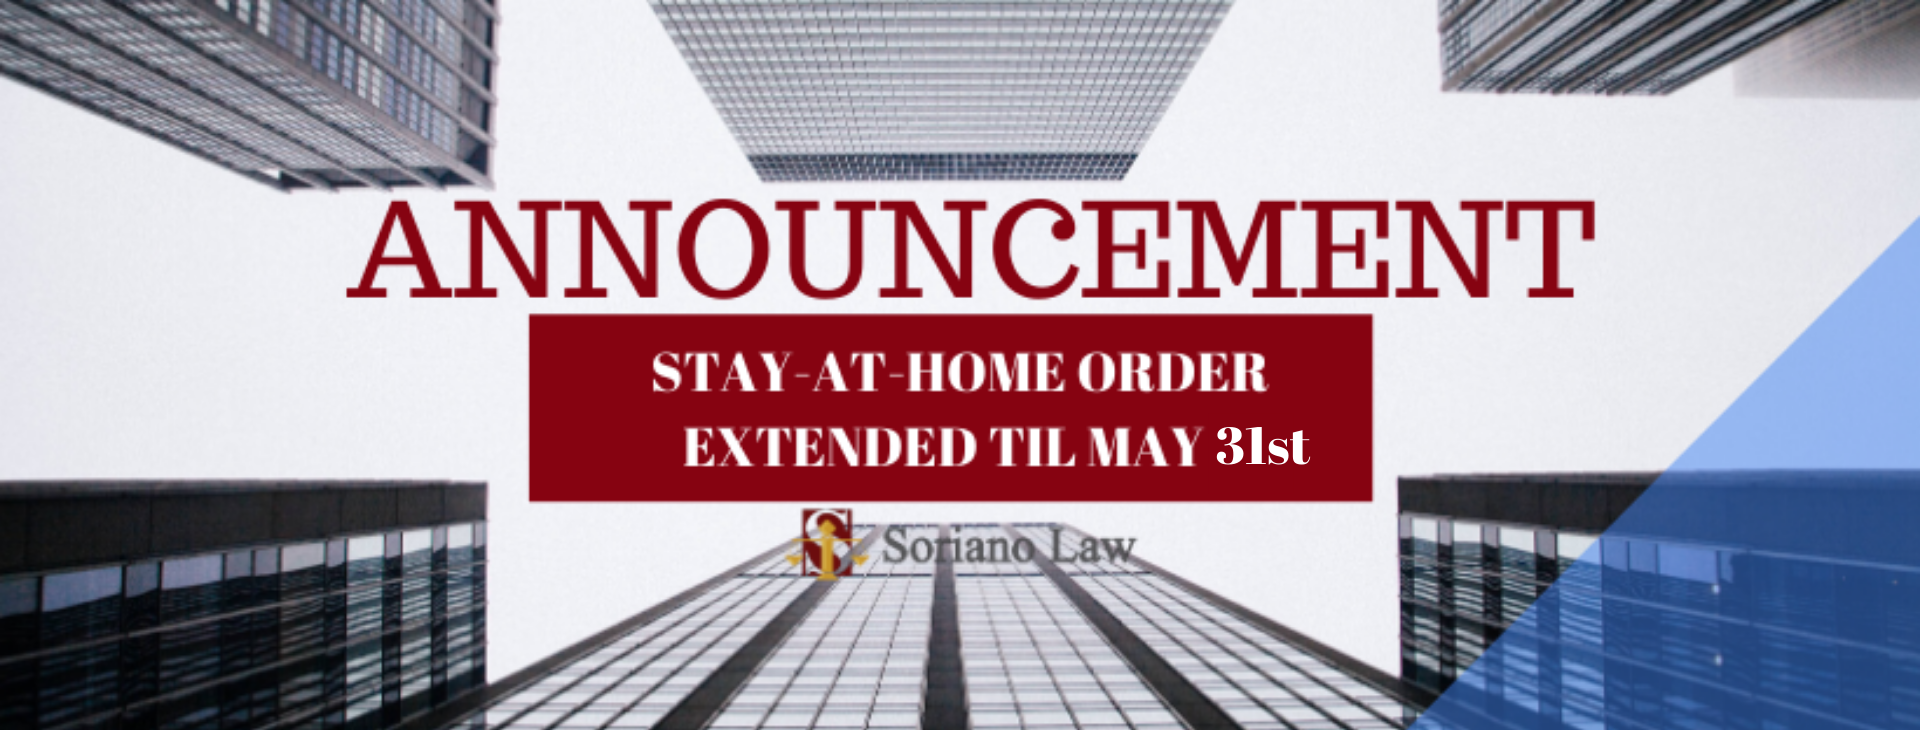 ANNOUNCEMENT ON STAY-AT-HOME ORDER